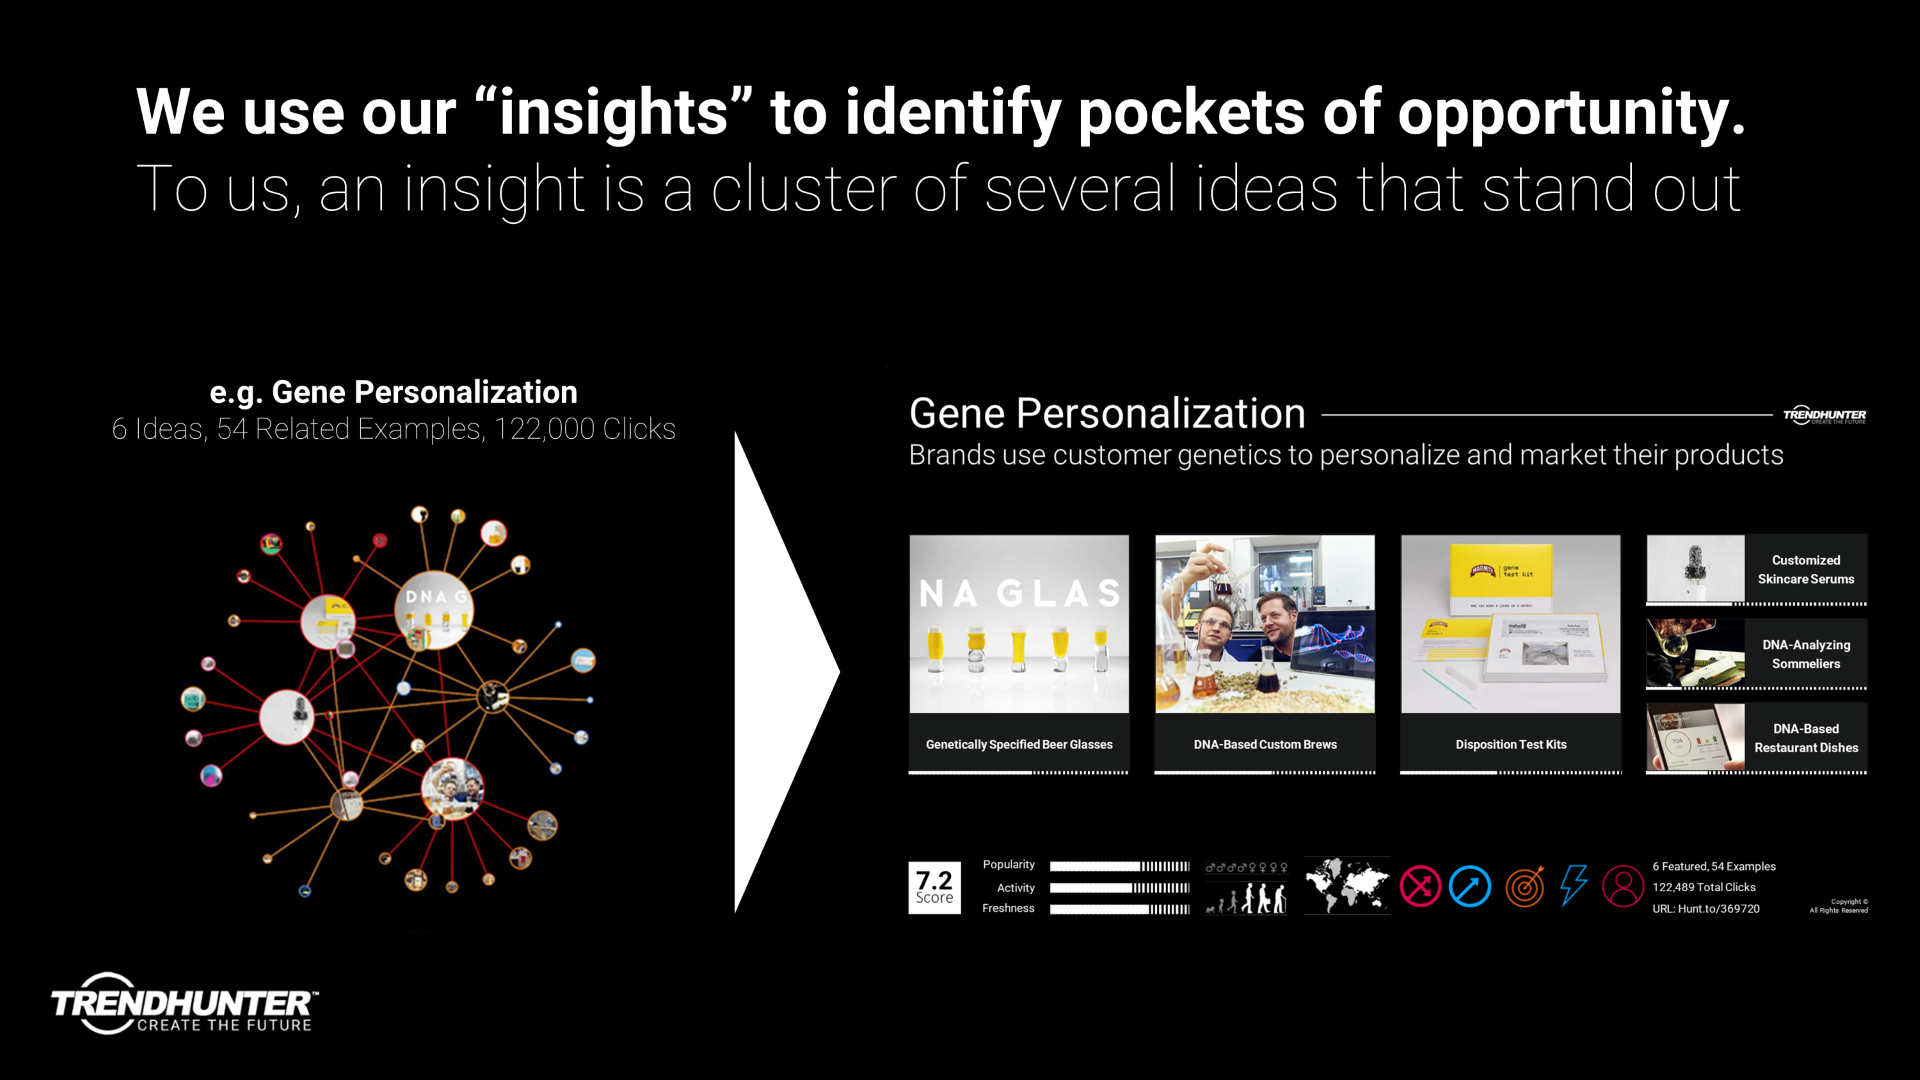 Image Slide: Using Insights to identify pockets of opportunity